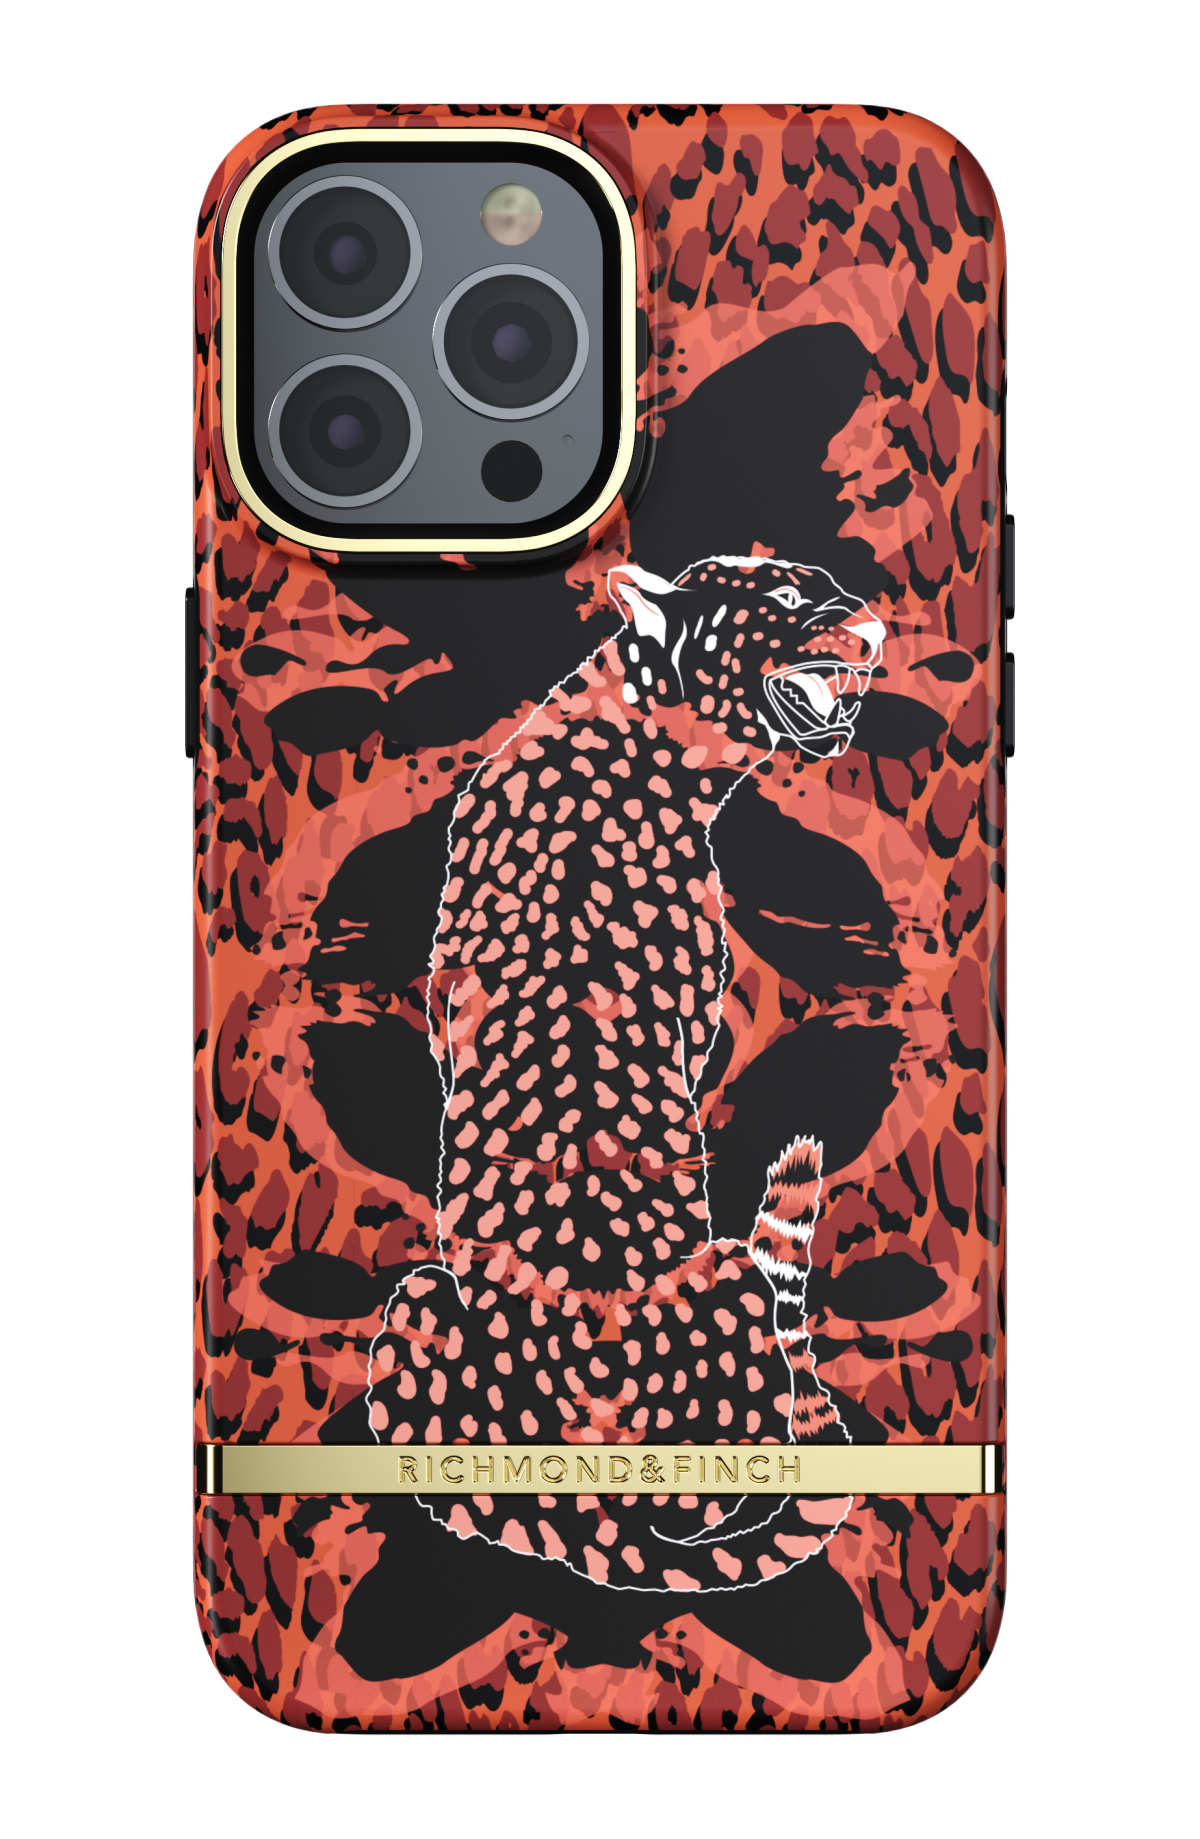 RICHMOND & Amber Backcover, Max, FINCH iPhone Gepard, Pro Apple, iPhone 13 Rot Tasche